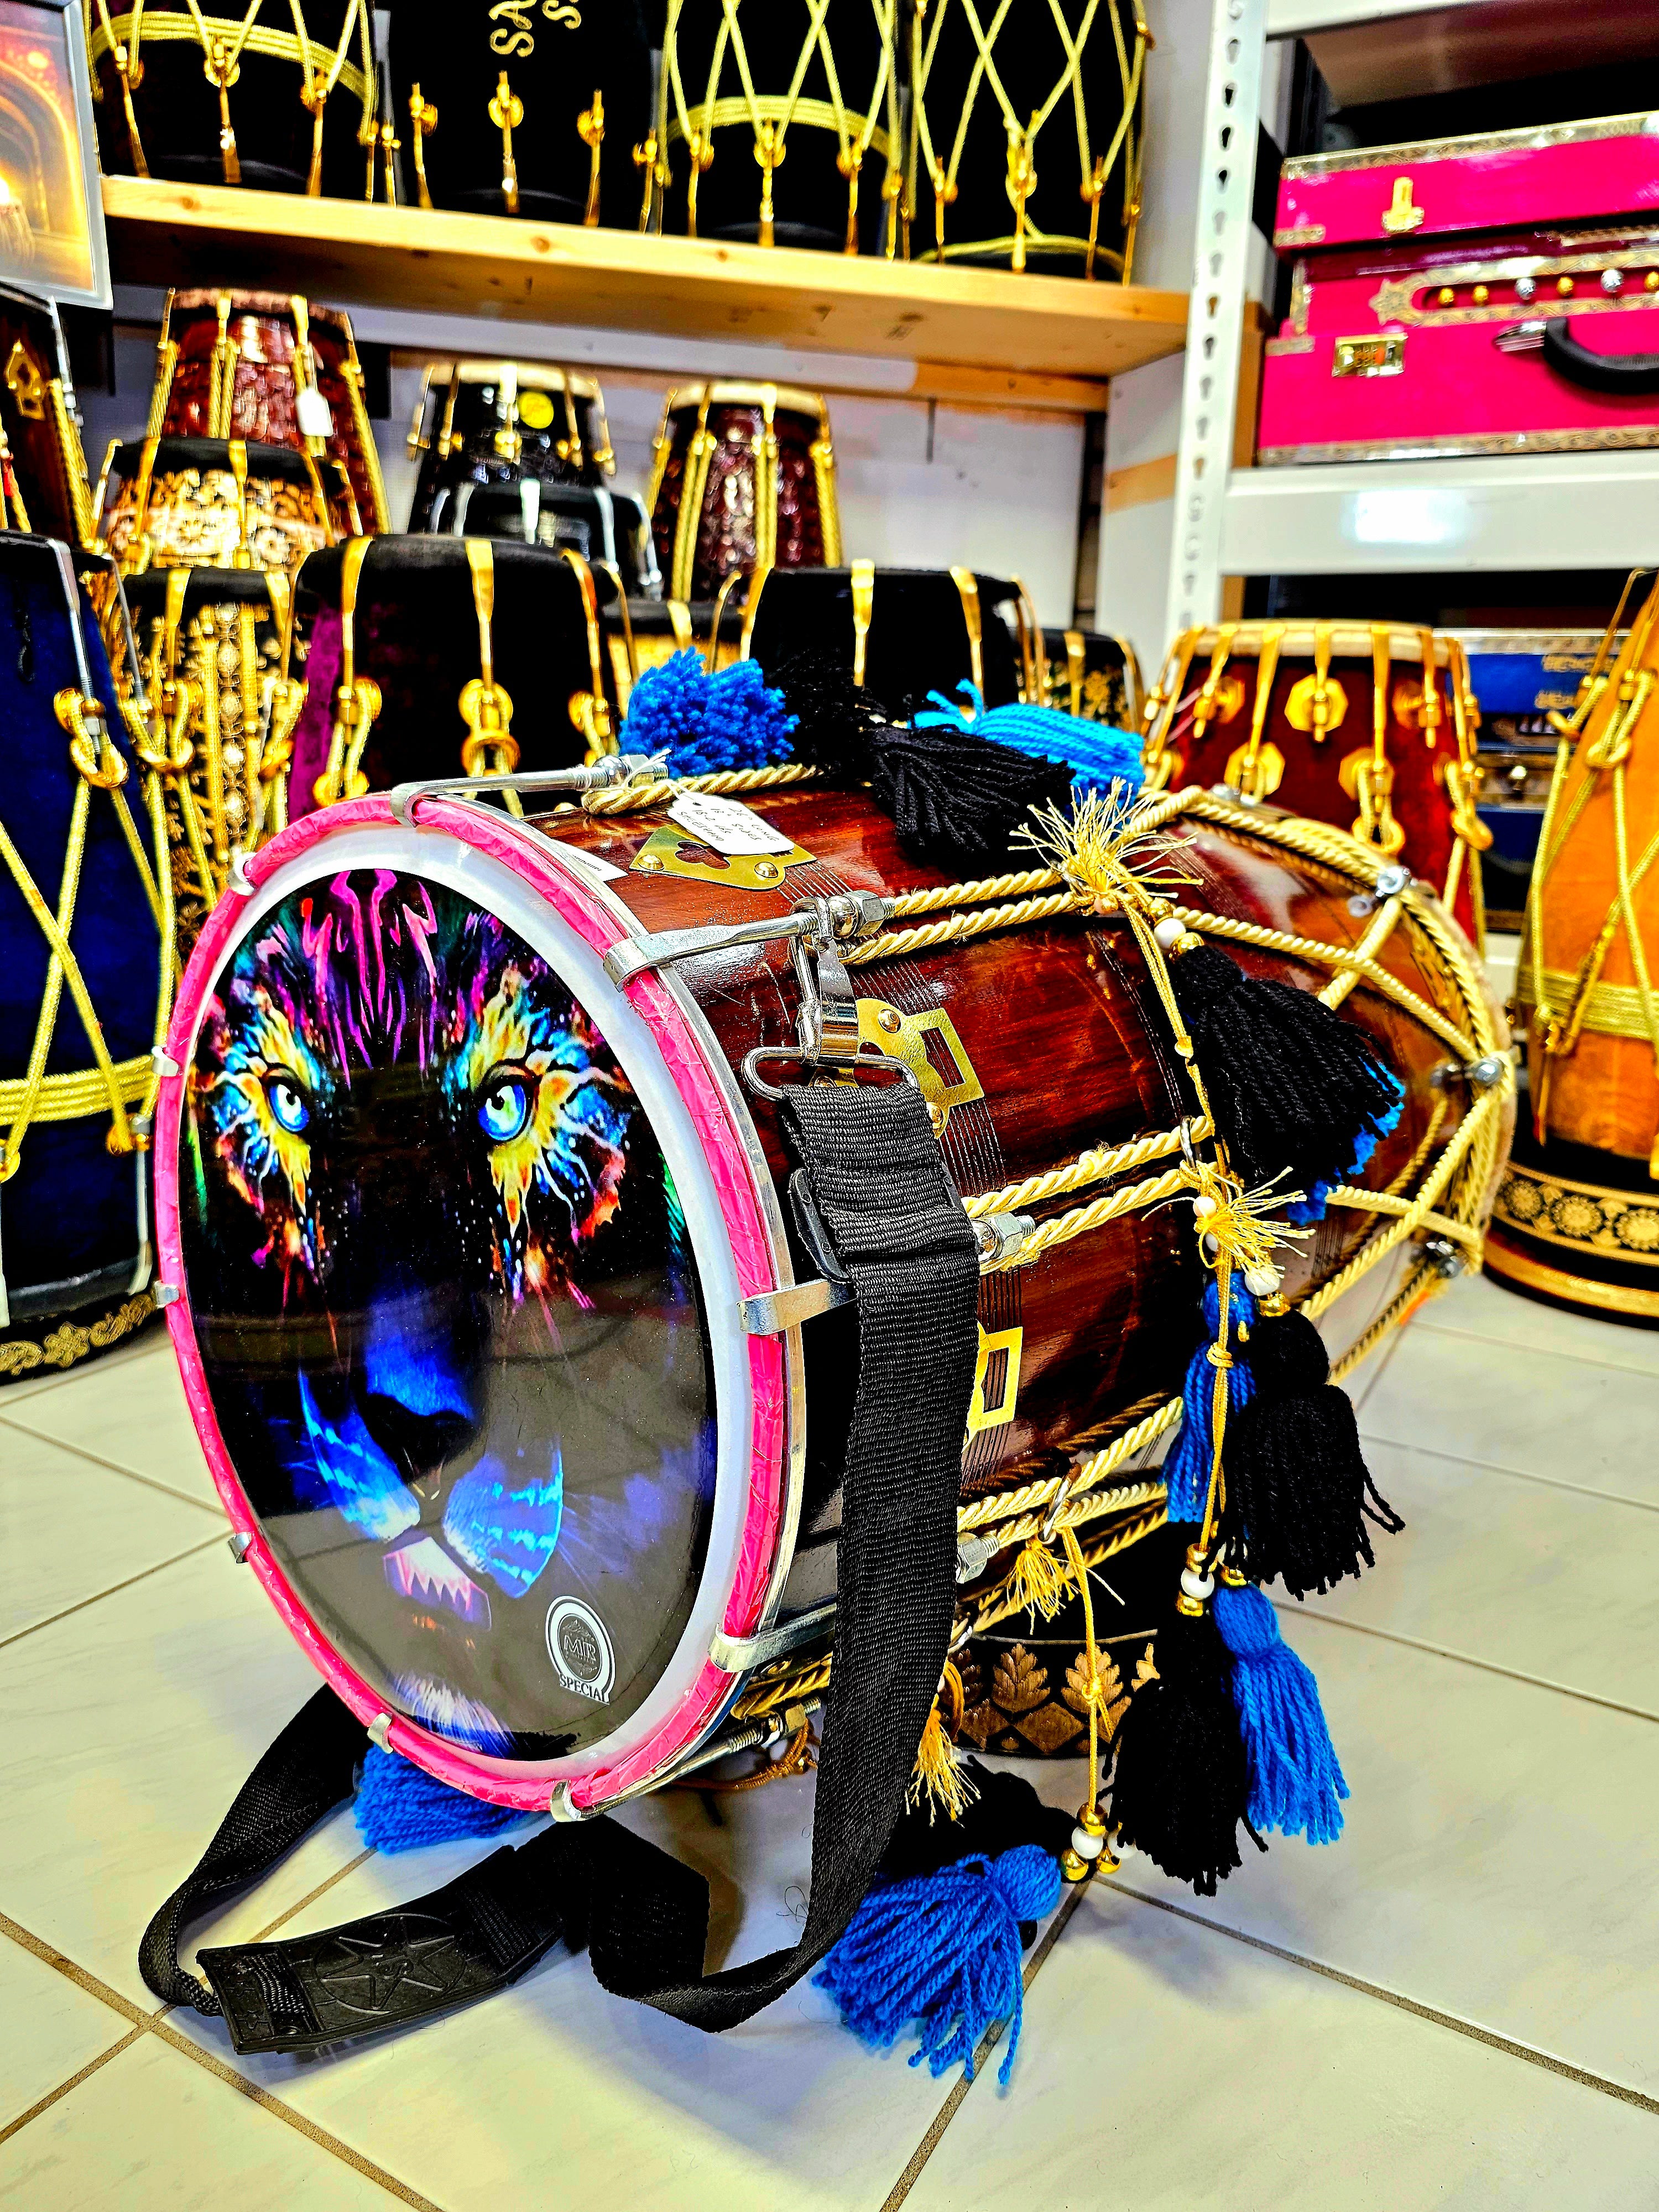 Royal Resonance: Red Sheesham Bolted Punjabi Dhol - 12" Bass, 12.5" Treble, Golden Ropes with Blue and Black Tassels *Minor Exterior Defects*